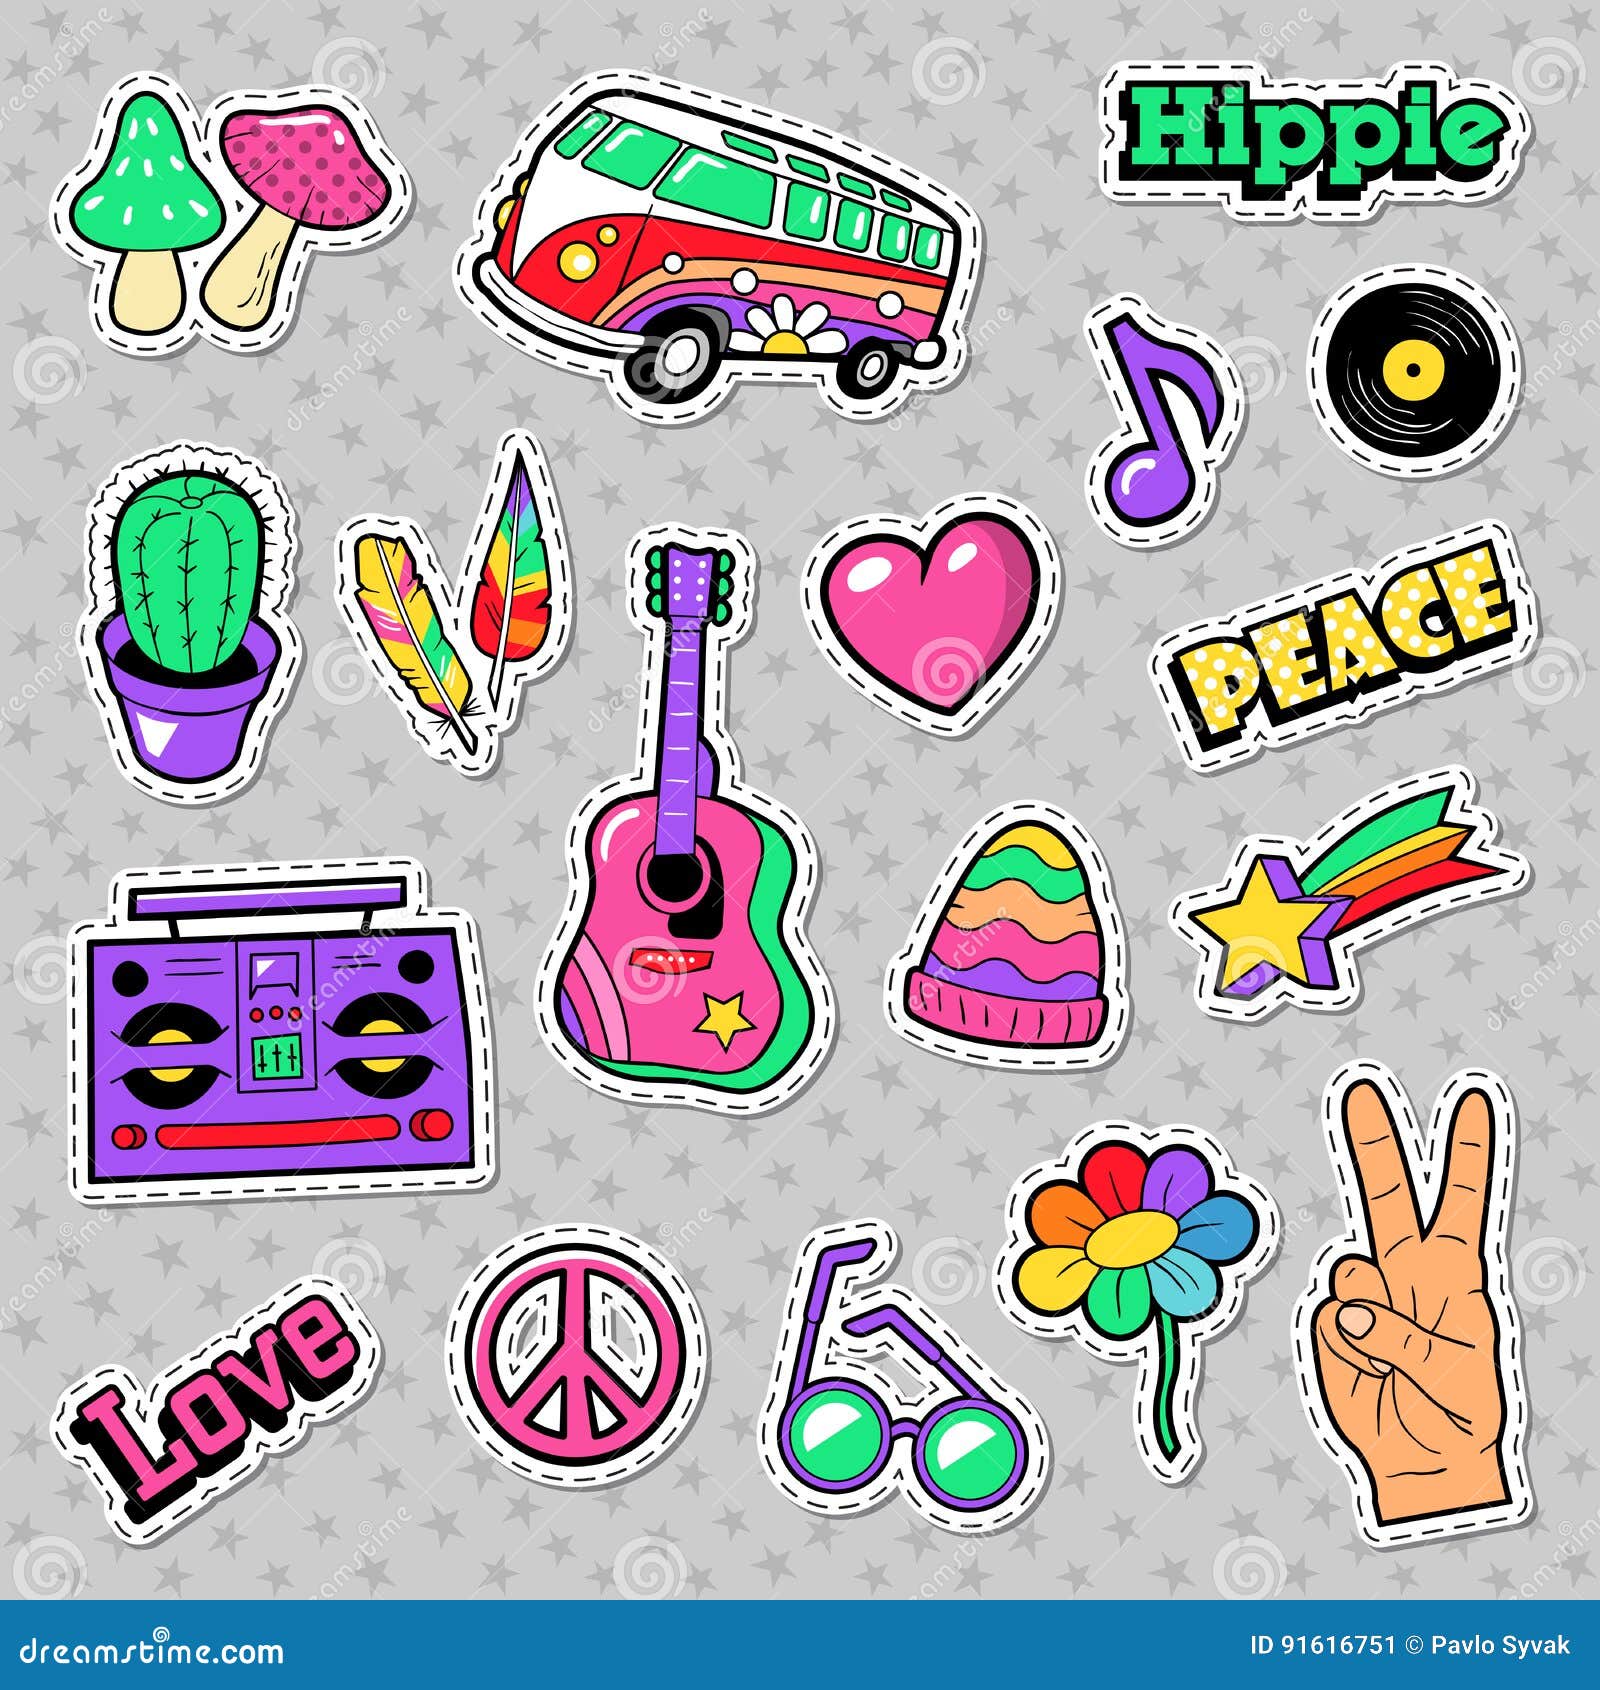 fashion hippie badges, patches, stickers with van mushroom guitar and feather